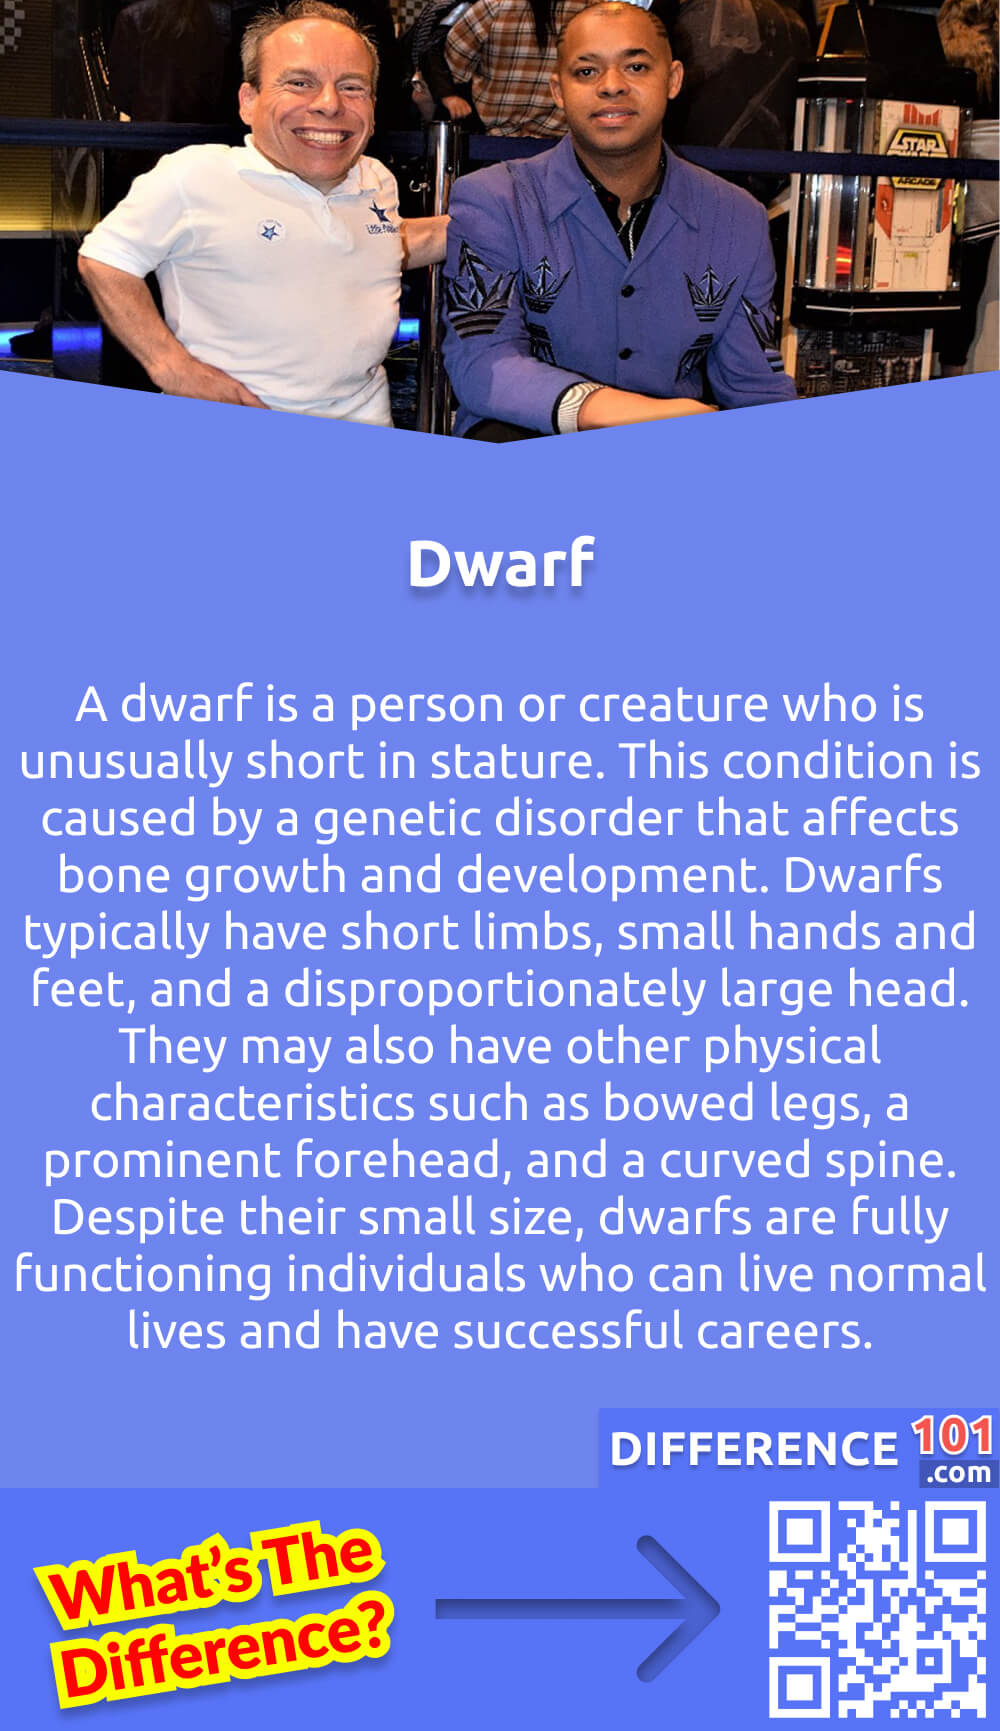 What Is Dwarf? A dwarf is a person or creature who is unusually short in stature. This condition is caused by a genetic disorder that affects bone growth and development. Dwarfs typically have short limbs, small hands and feet, and a disproportionately large head. They may also have other physical characteristics such as bowed legs, a prominent forehead, and a curved spine. Despite their small size, dwarfs are fully functioning individuals who can live normal lives and have successful careers. While some may face challenges in certain activities that require height, they can still participate in most activities and contribute to society in meaningful ways. It is important to treat dwarfs with respect and dignity, and not to discriminate against them based on their physical appearance.